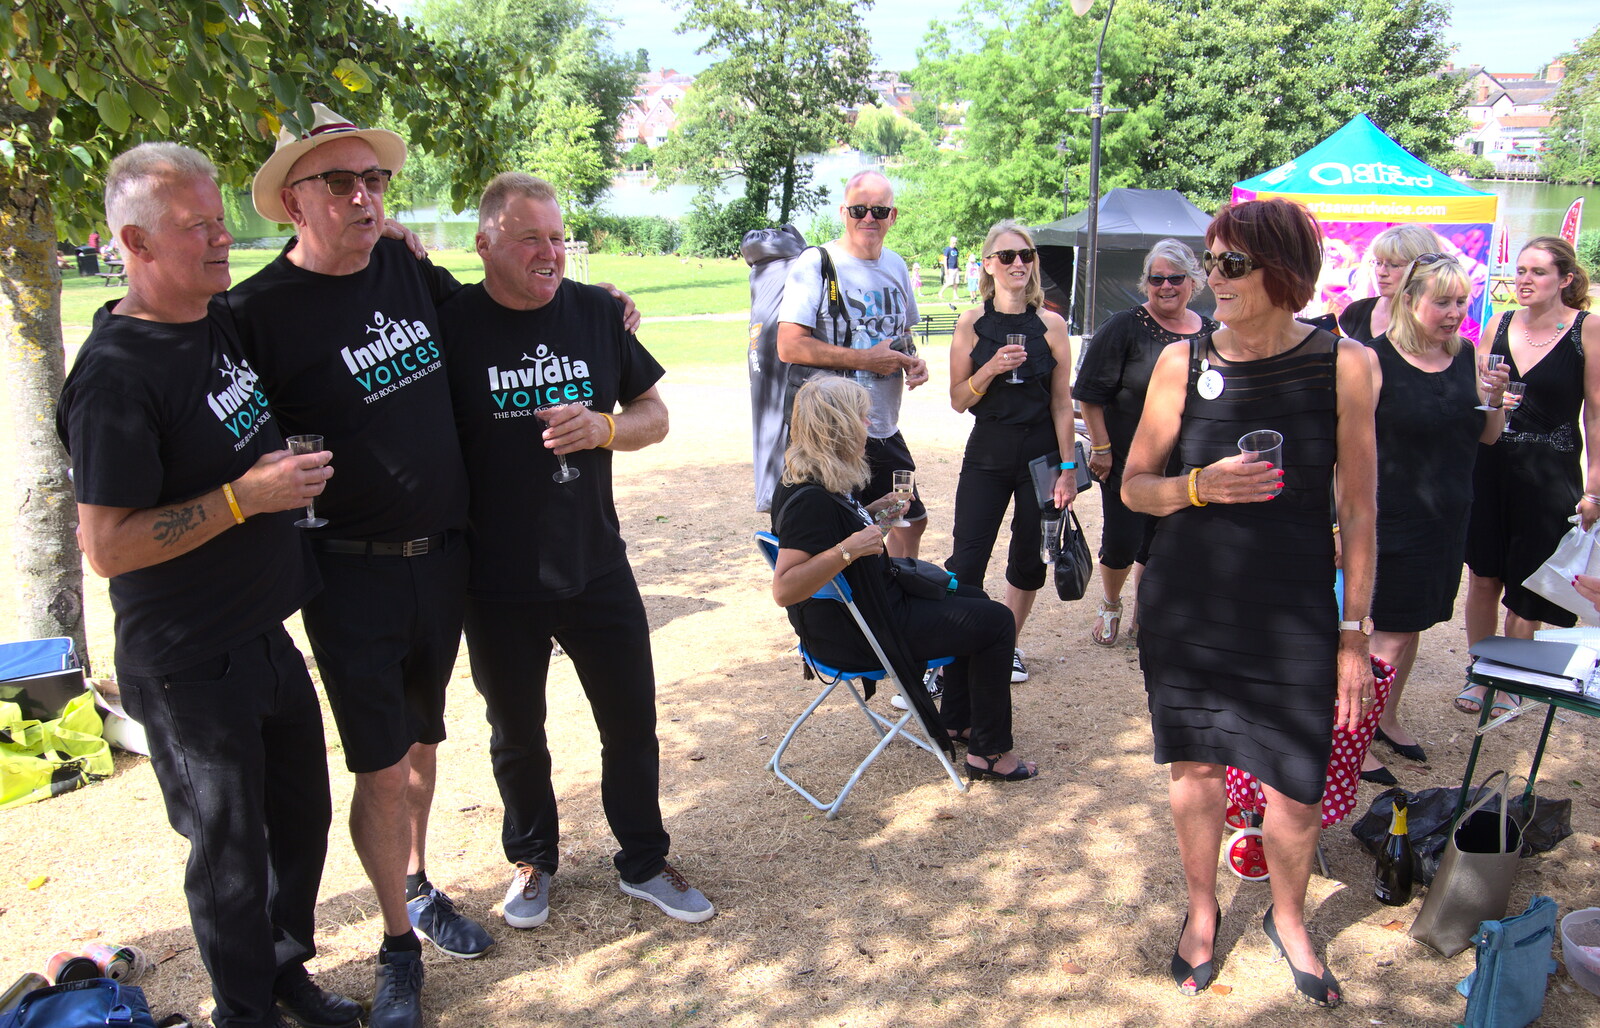 The bass section have a moment from Diss Fest, The Park, Diss, Norfolk - 22nd July 2018